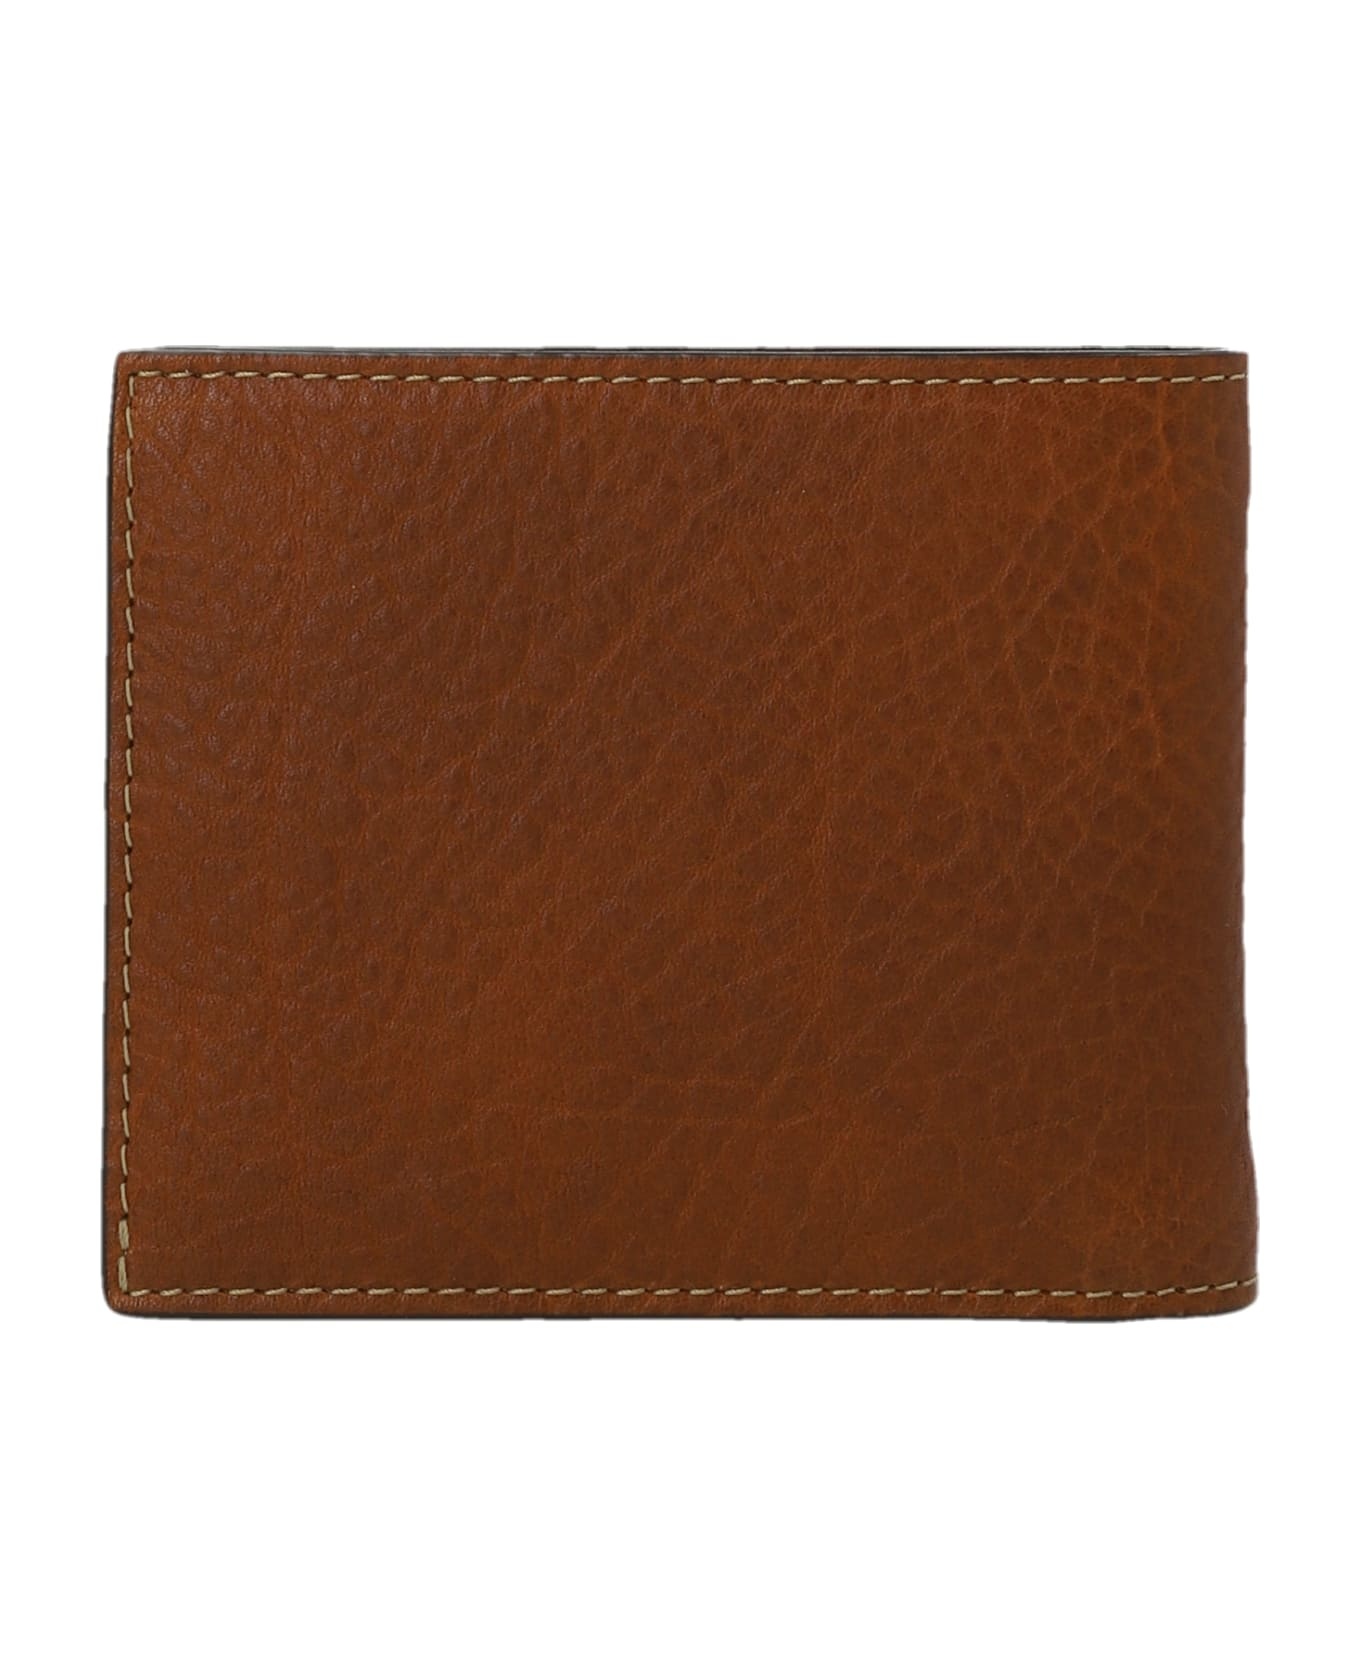 Grained Leather Wallet - 2